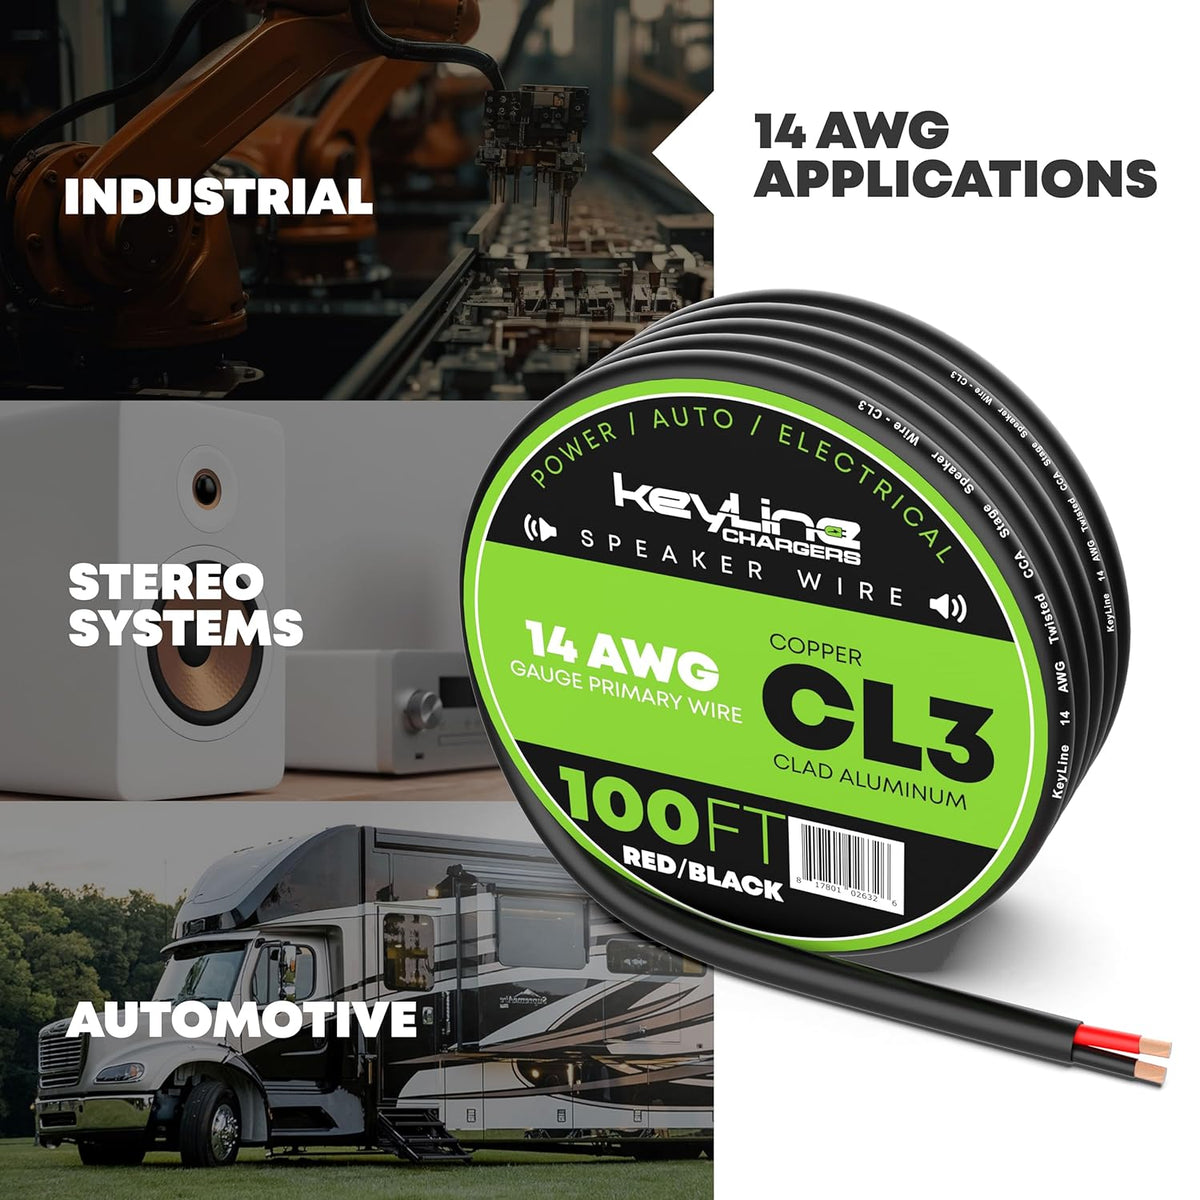 14 Gauge Speaker Wire - 100 Feet Black| 14-2 AWG Gauge - Outdoor Speaker Wire, CL3 CL2 Rated for in Ground Burial & in Wall / 2 Conductors - Marine Speaker Wire CCA Copper Clad Aluminum, Black 100ft